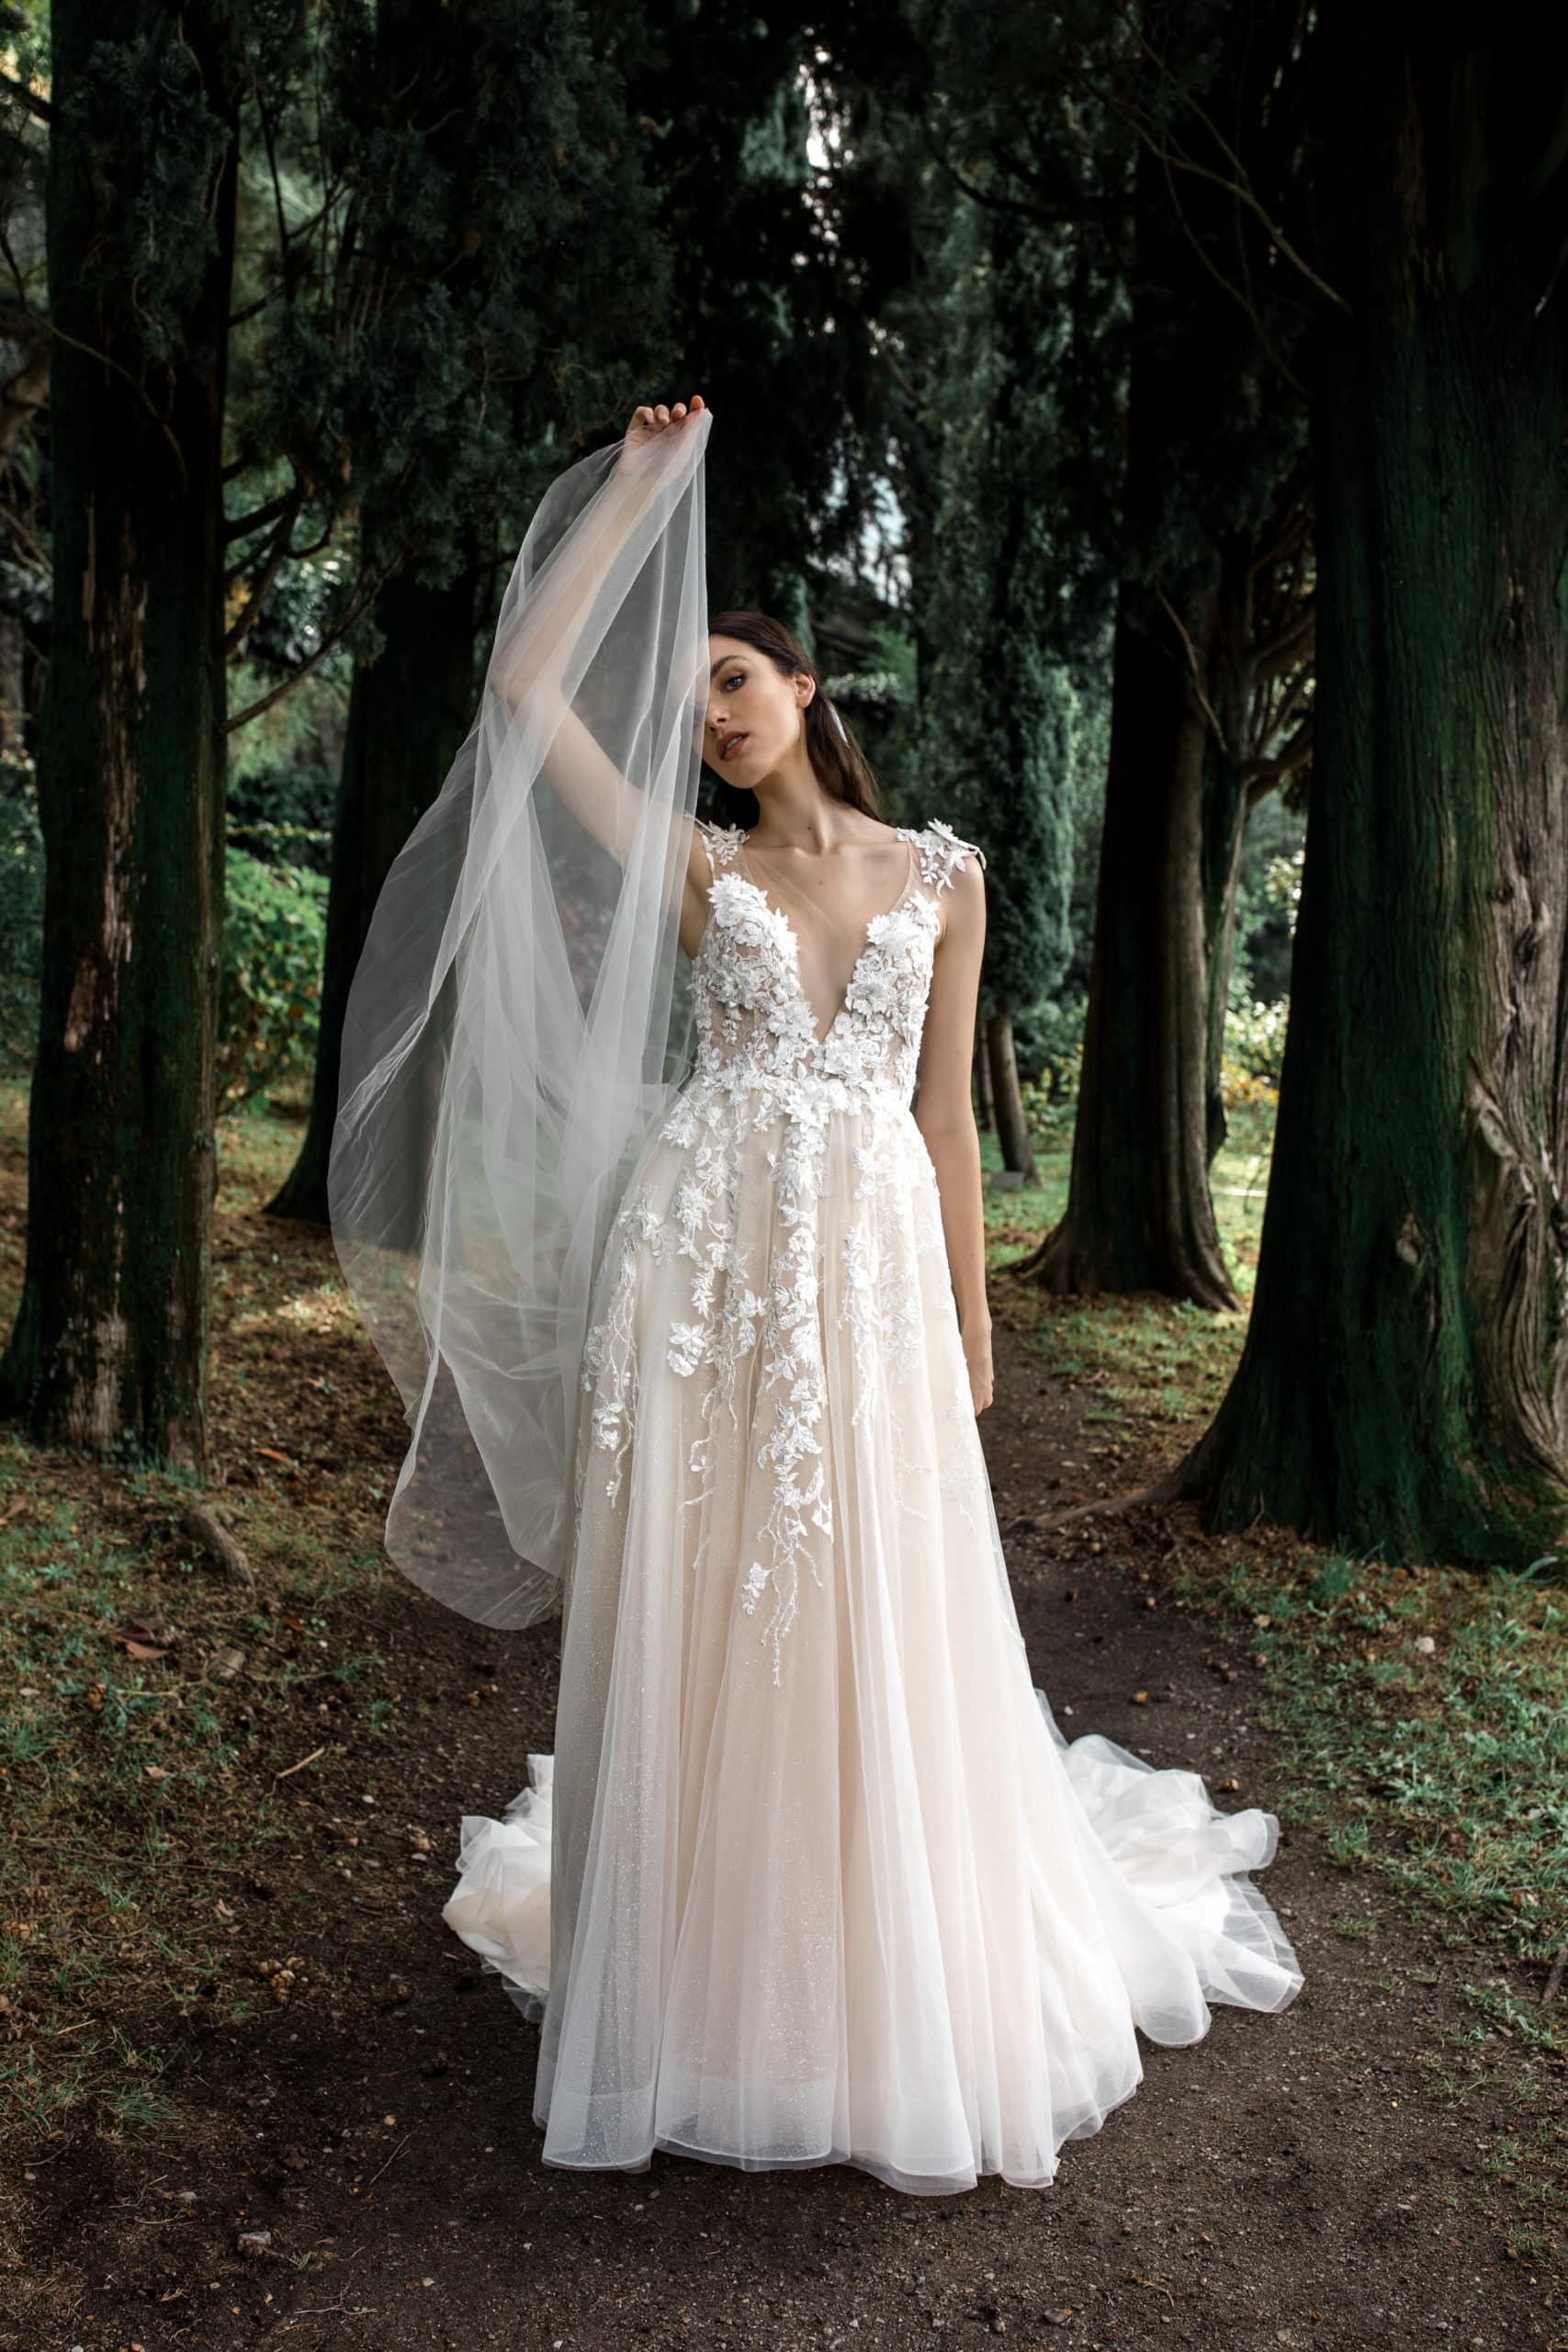 Lace floral bridal gown modeled in Lake Como